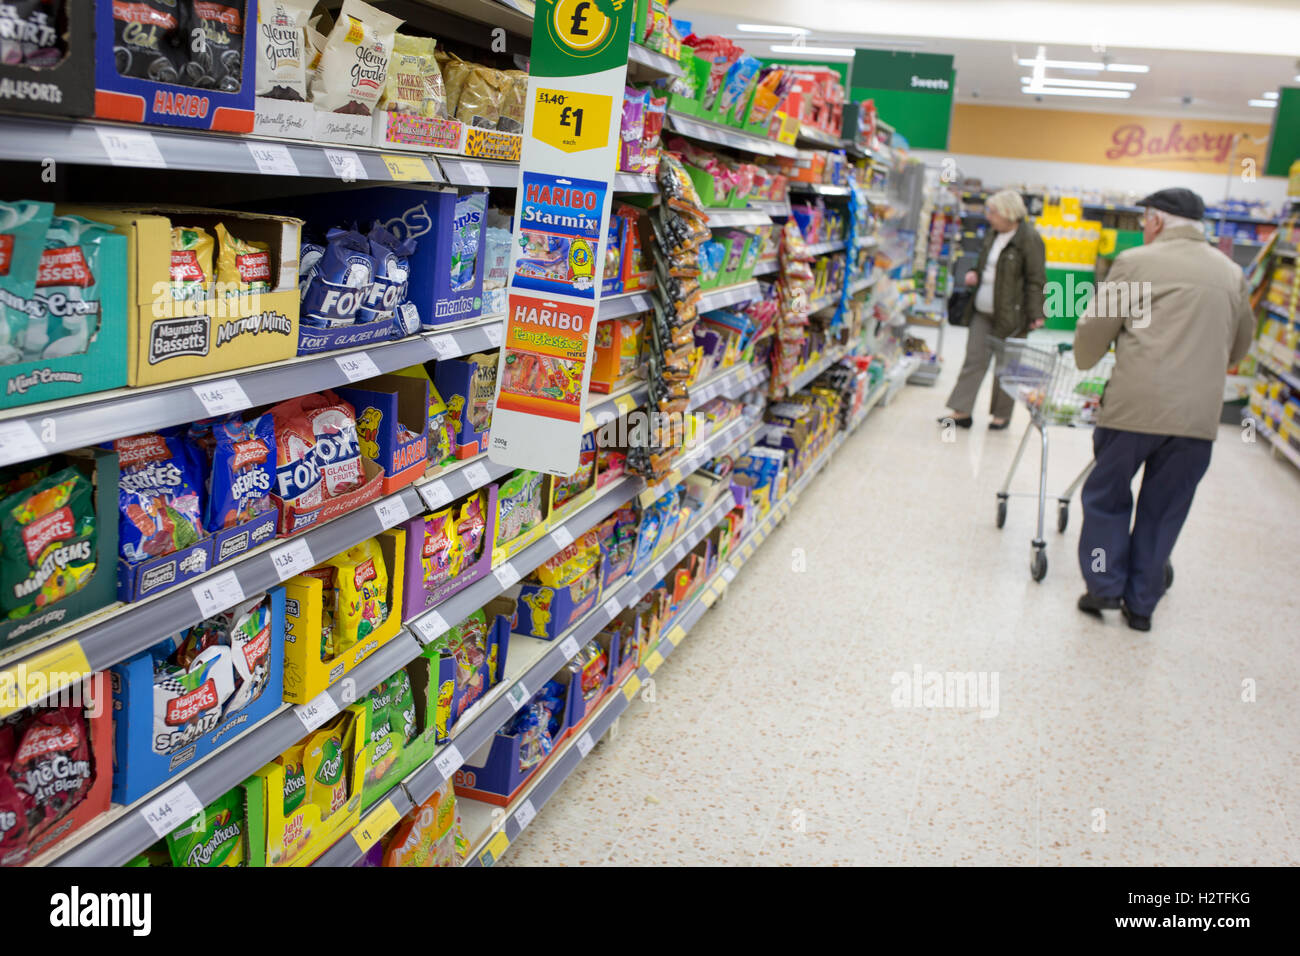 Sweets for sale - Interior of a Morrisons supermarket. Old man shopping Stock Photo